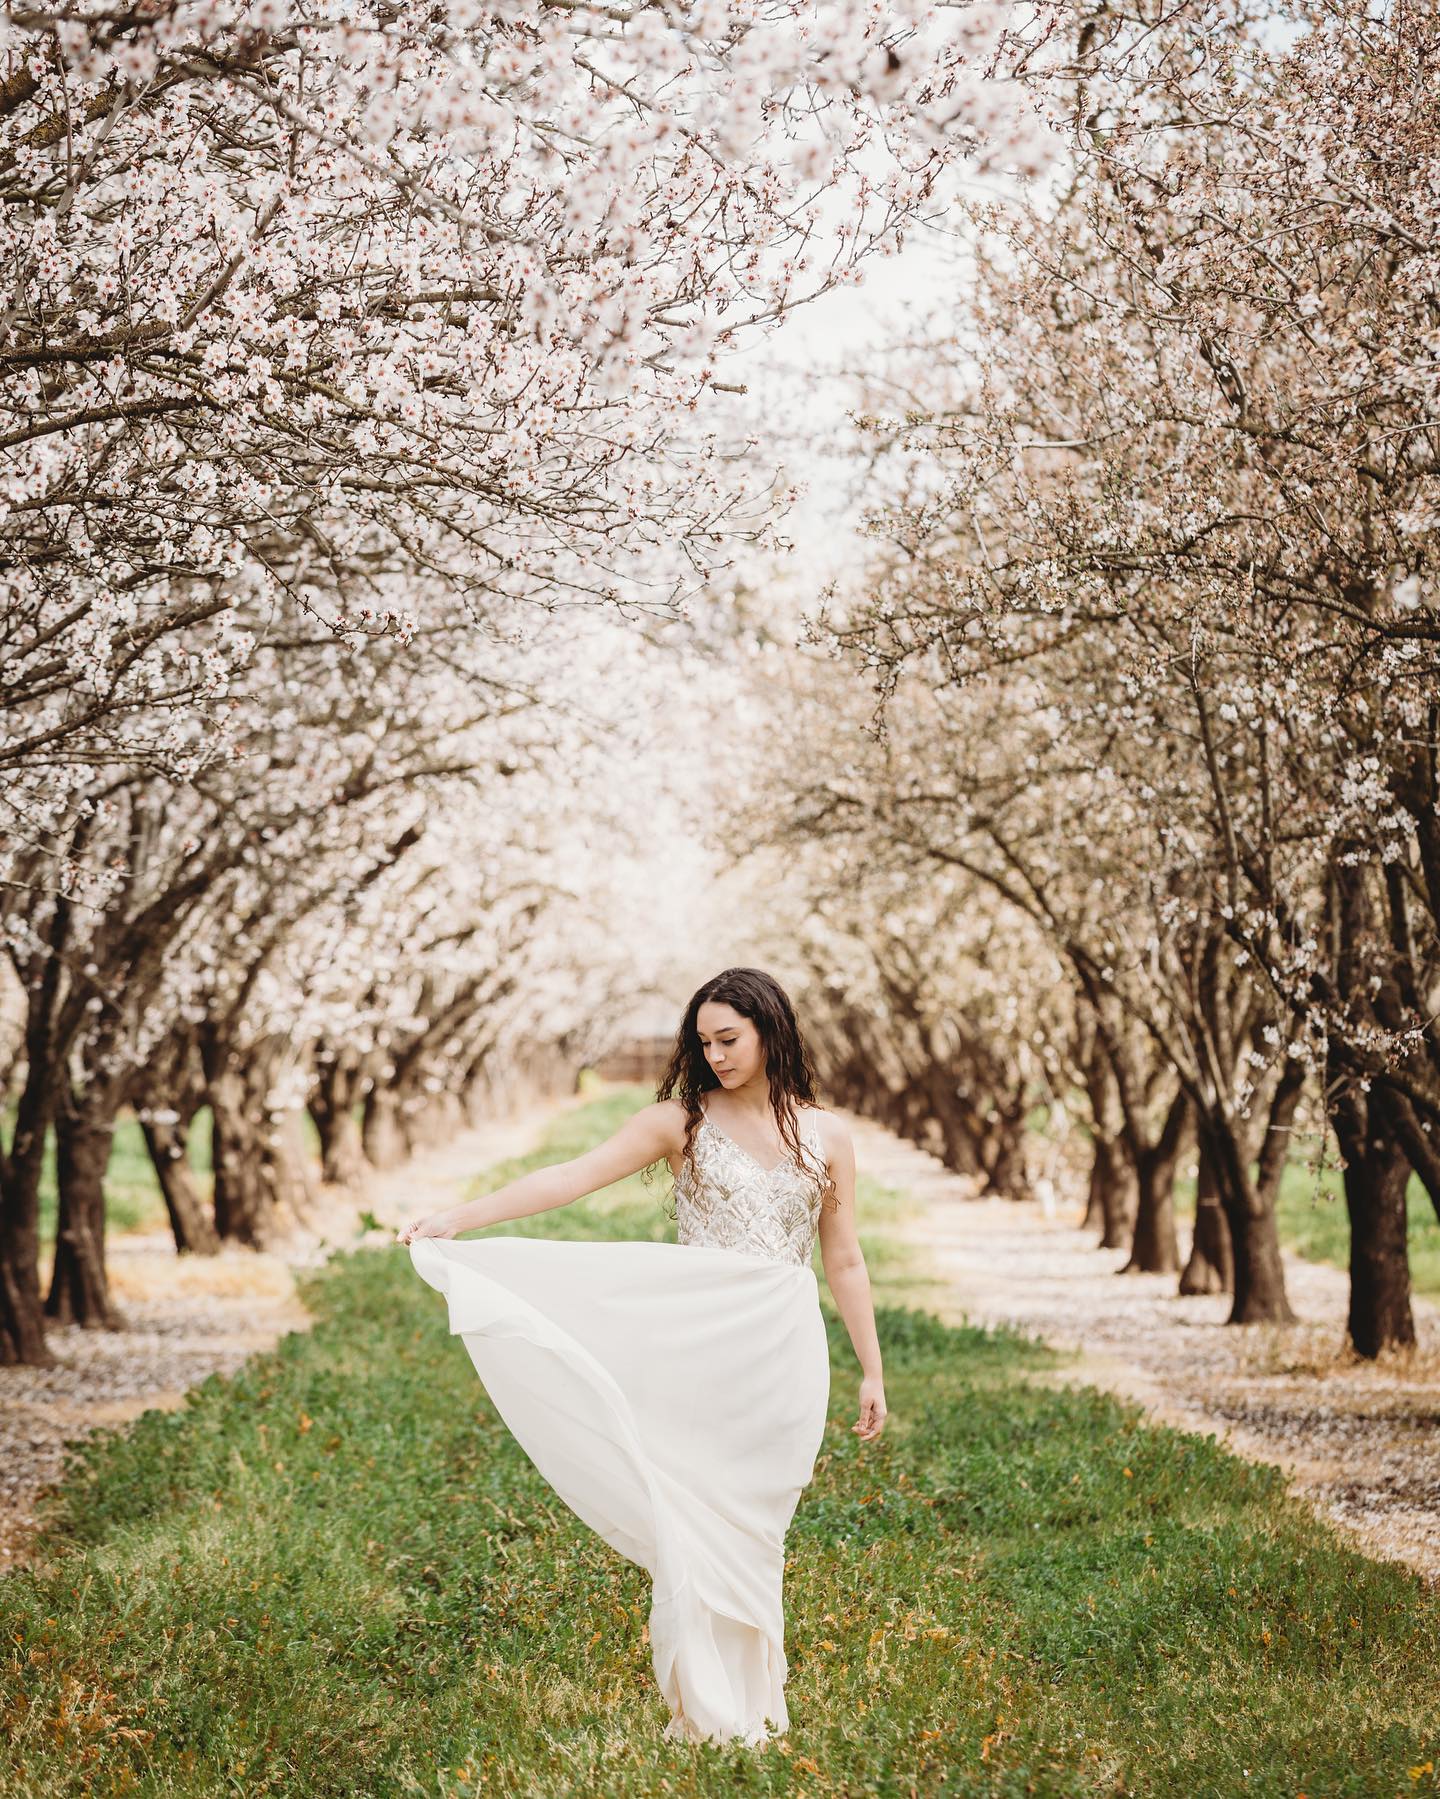 A bride posing in front of a lane decorated with cherry blossoms